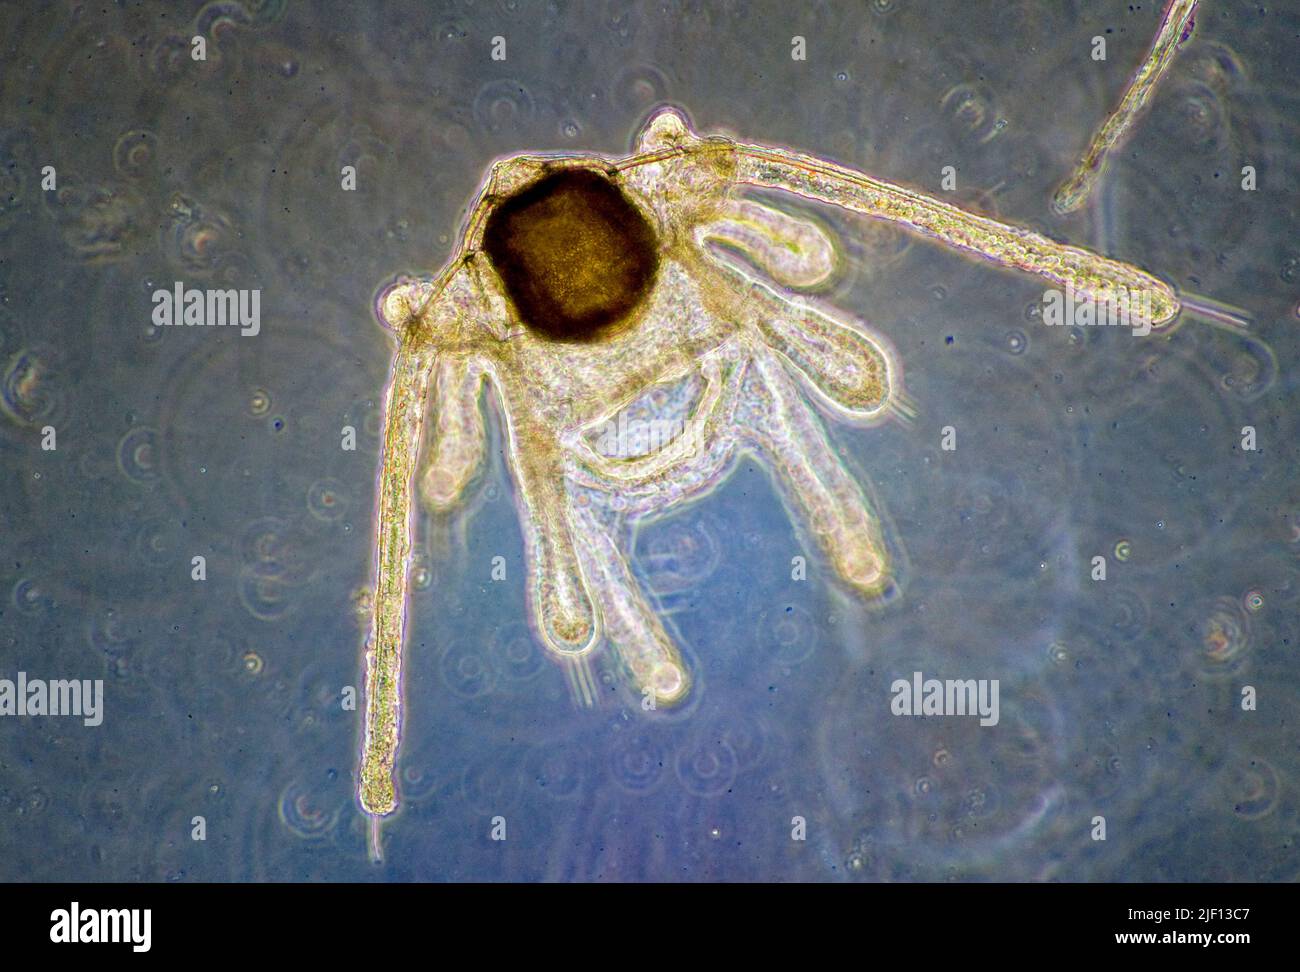 Planctonic larvae of a brittle star, possibly Ophiura sp. Stock Photo